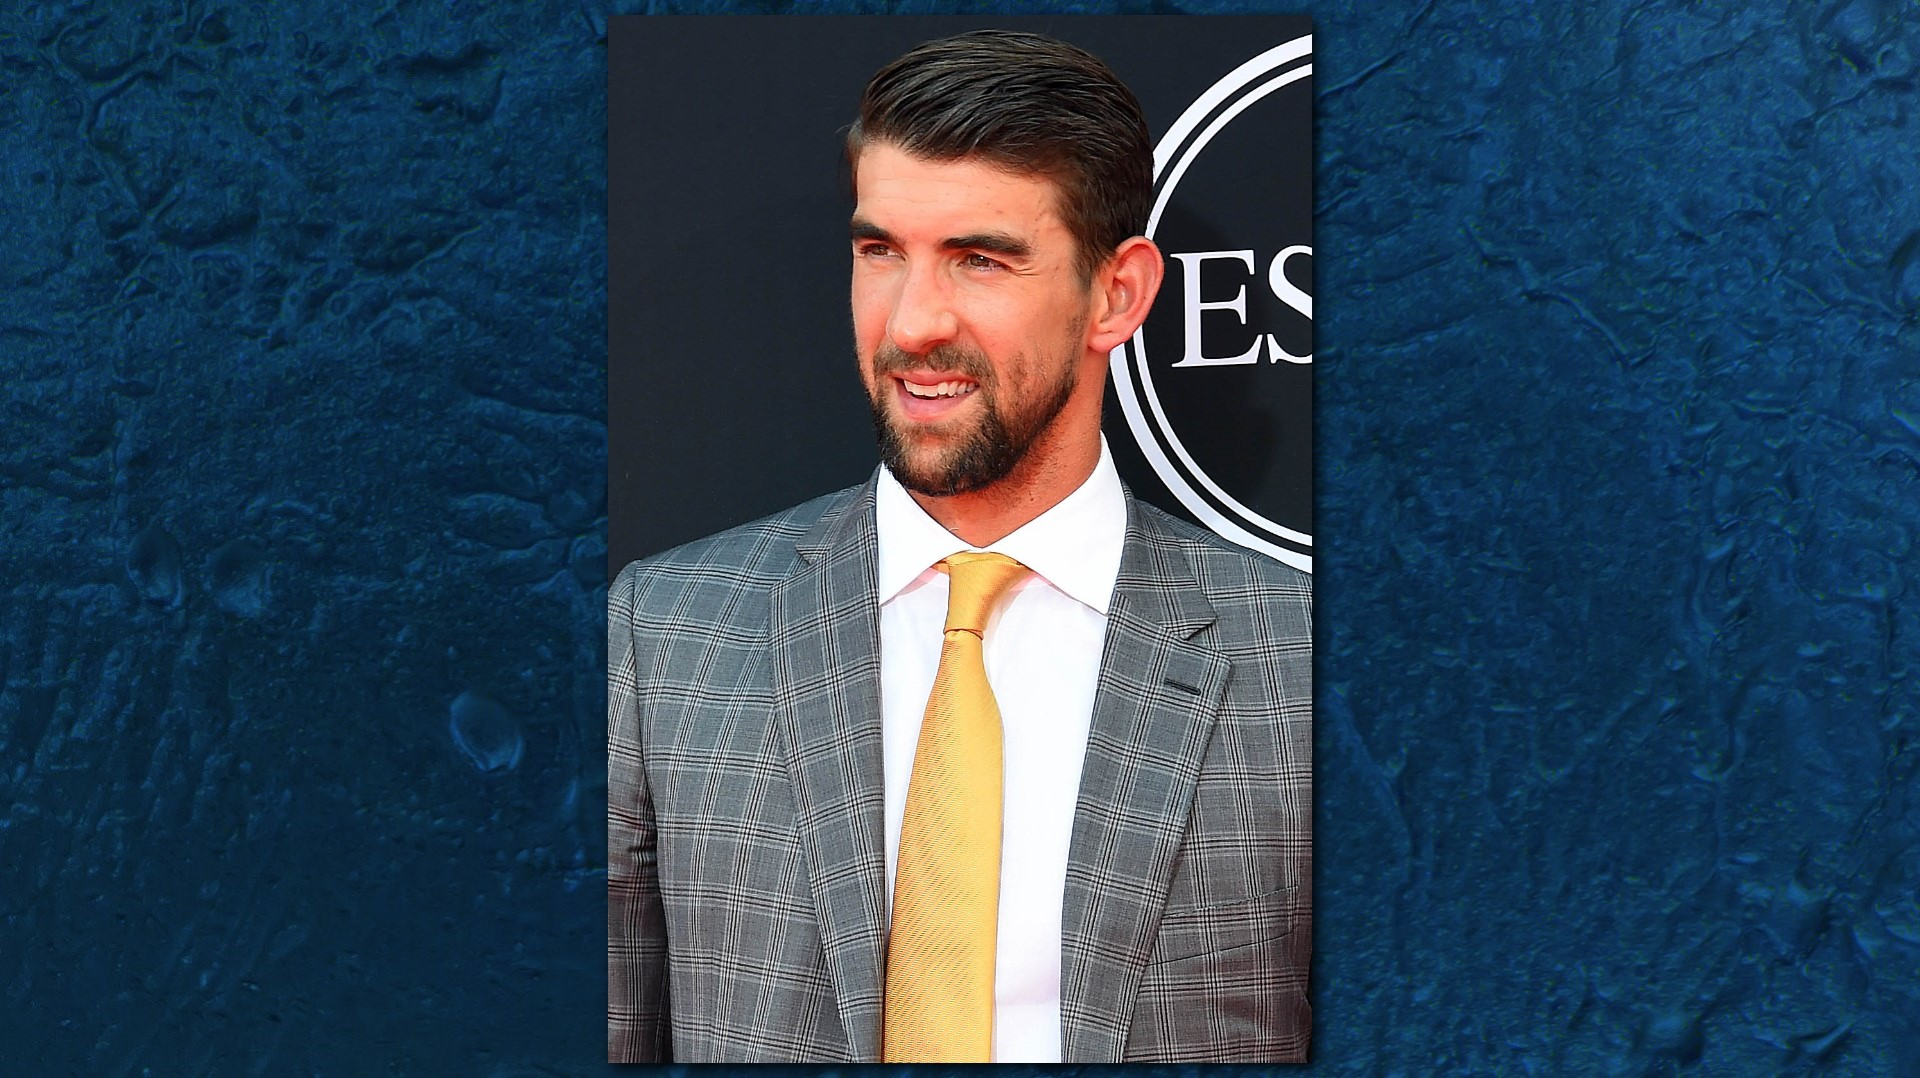 Michael Phelps Wanted To Race Shark Without Cage